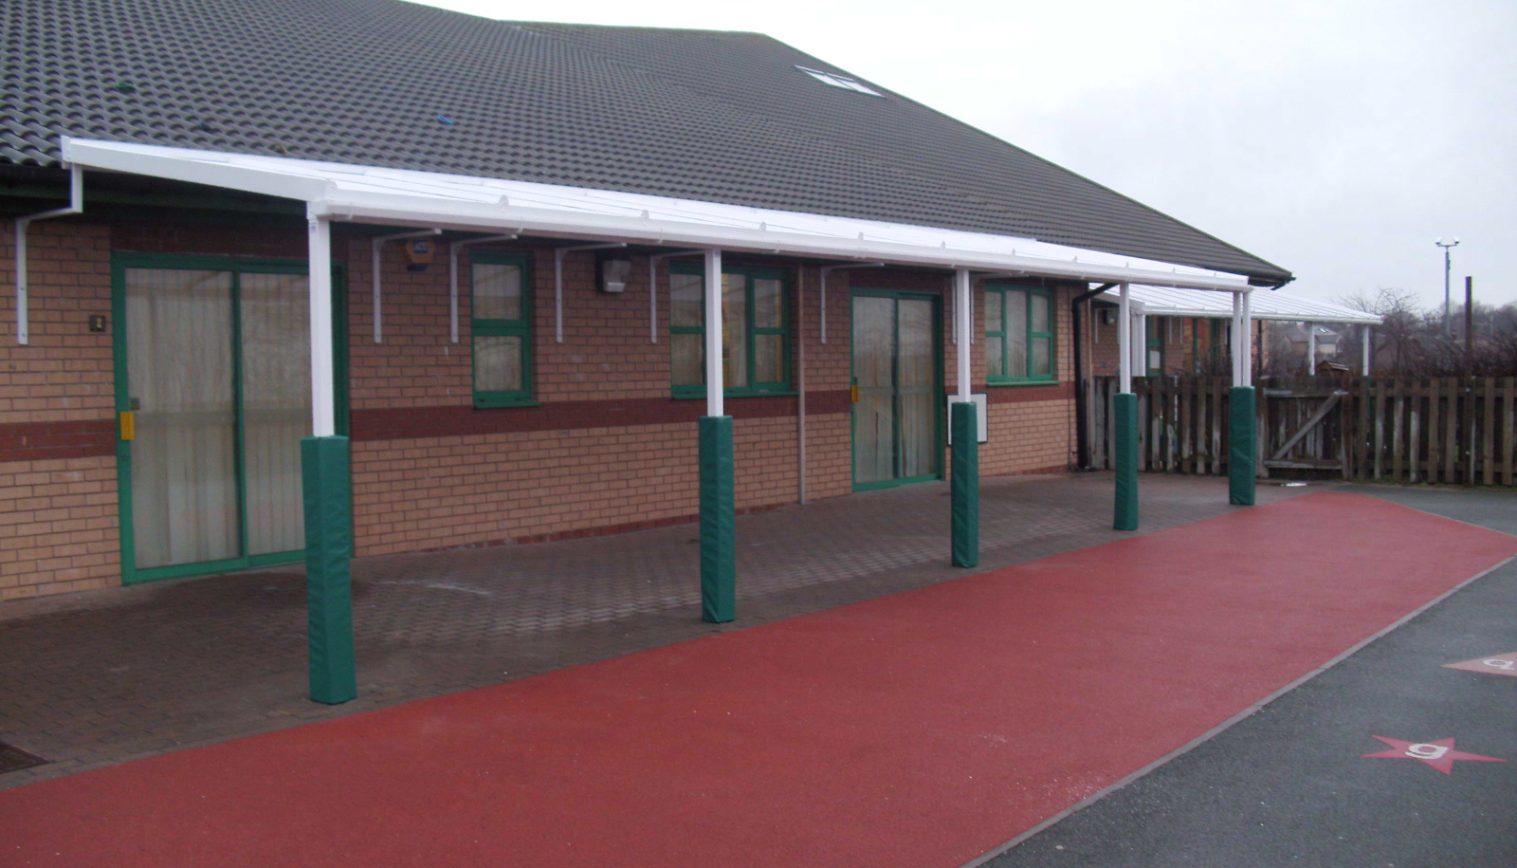 Alexandra Community Primary School – 2nd Wall Mounted Canopy